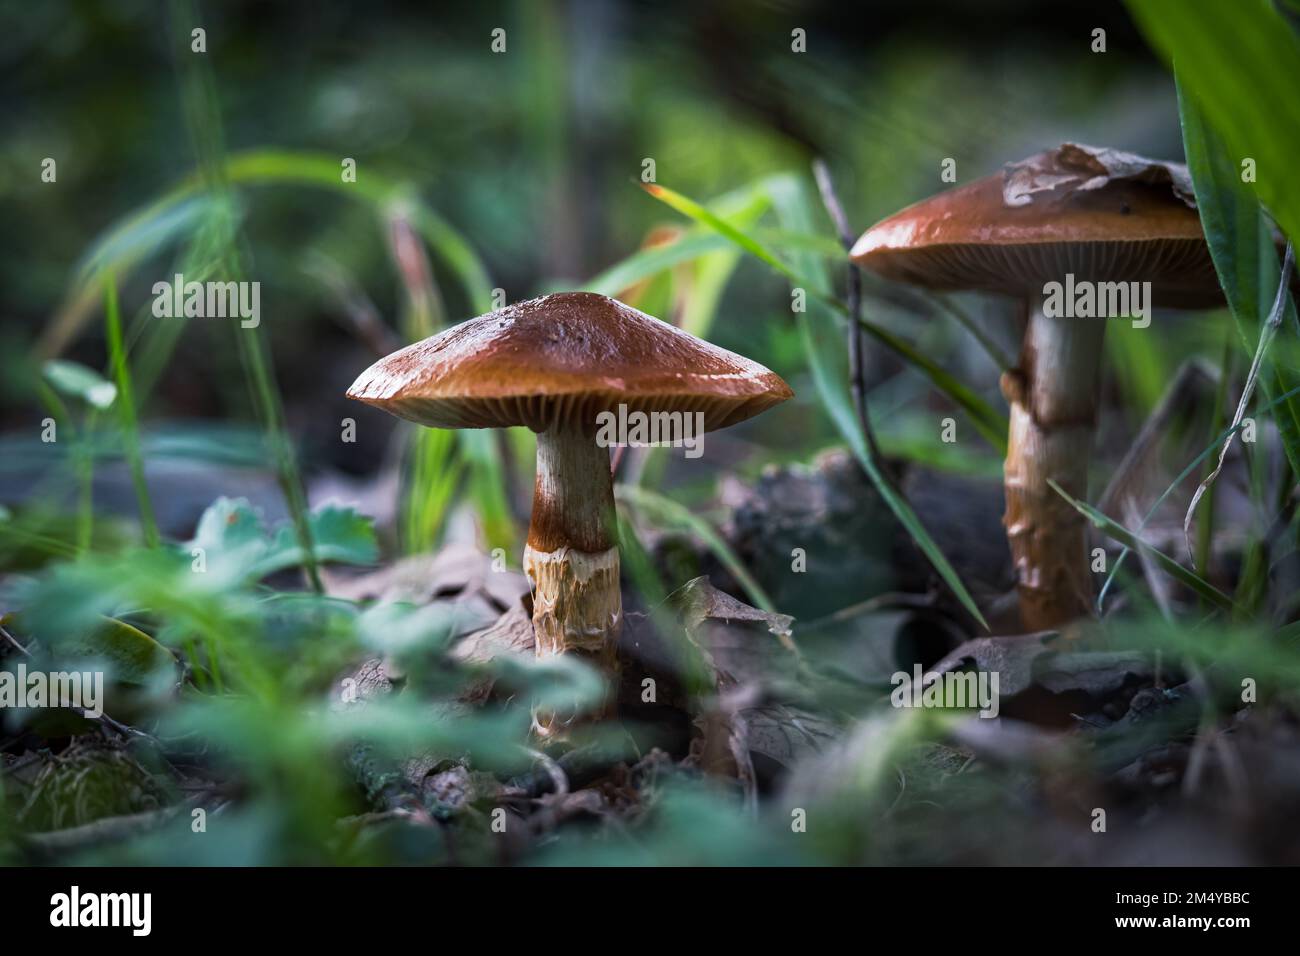 A closeup of a Cortinarius armillatus mushroom growing in the forest after rain. Stock Photo